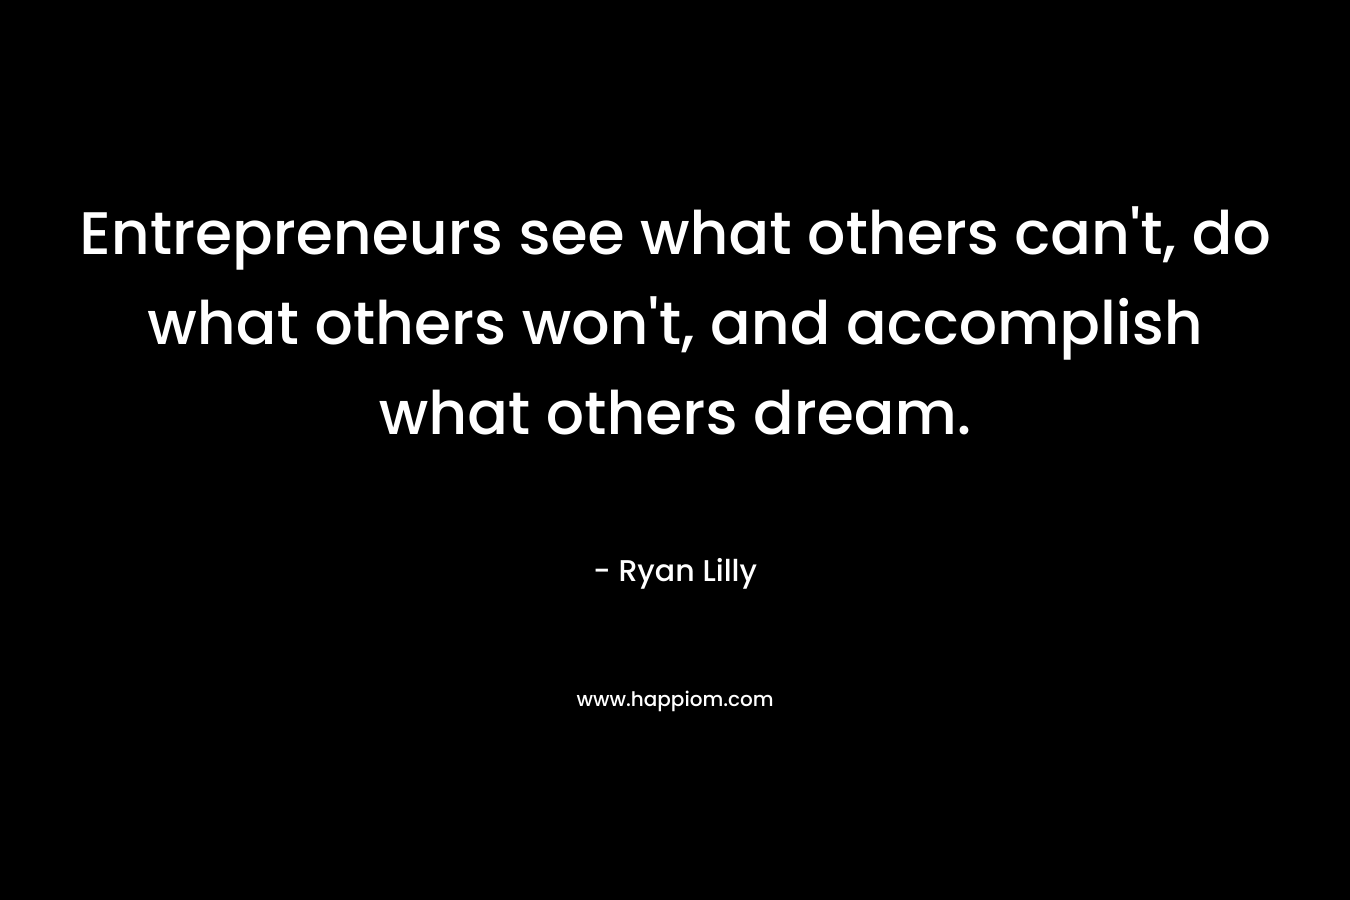 Entrepreneurs see what others can't, do what others won't, and accomplish what others dream.